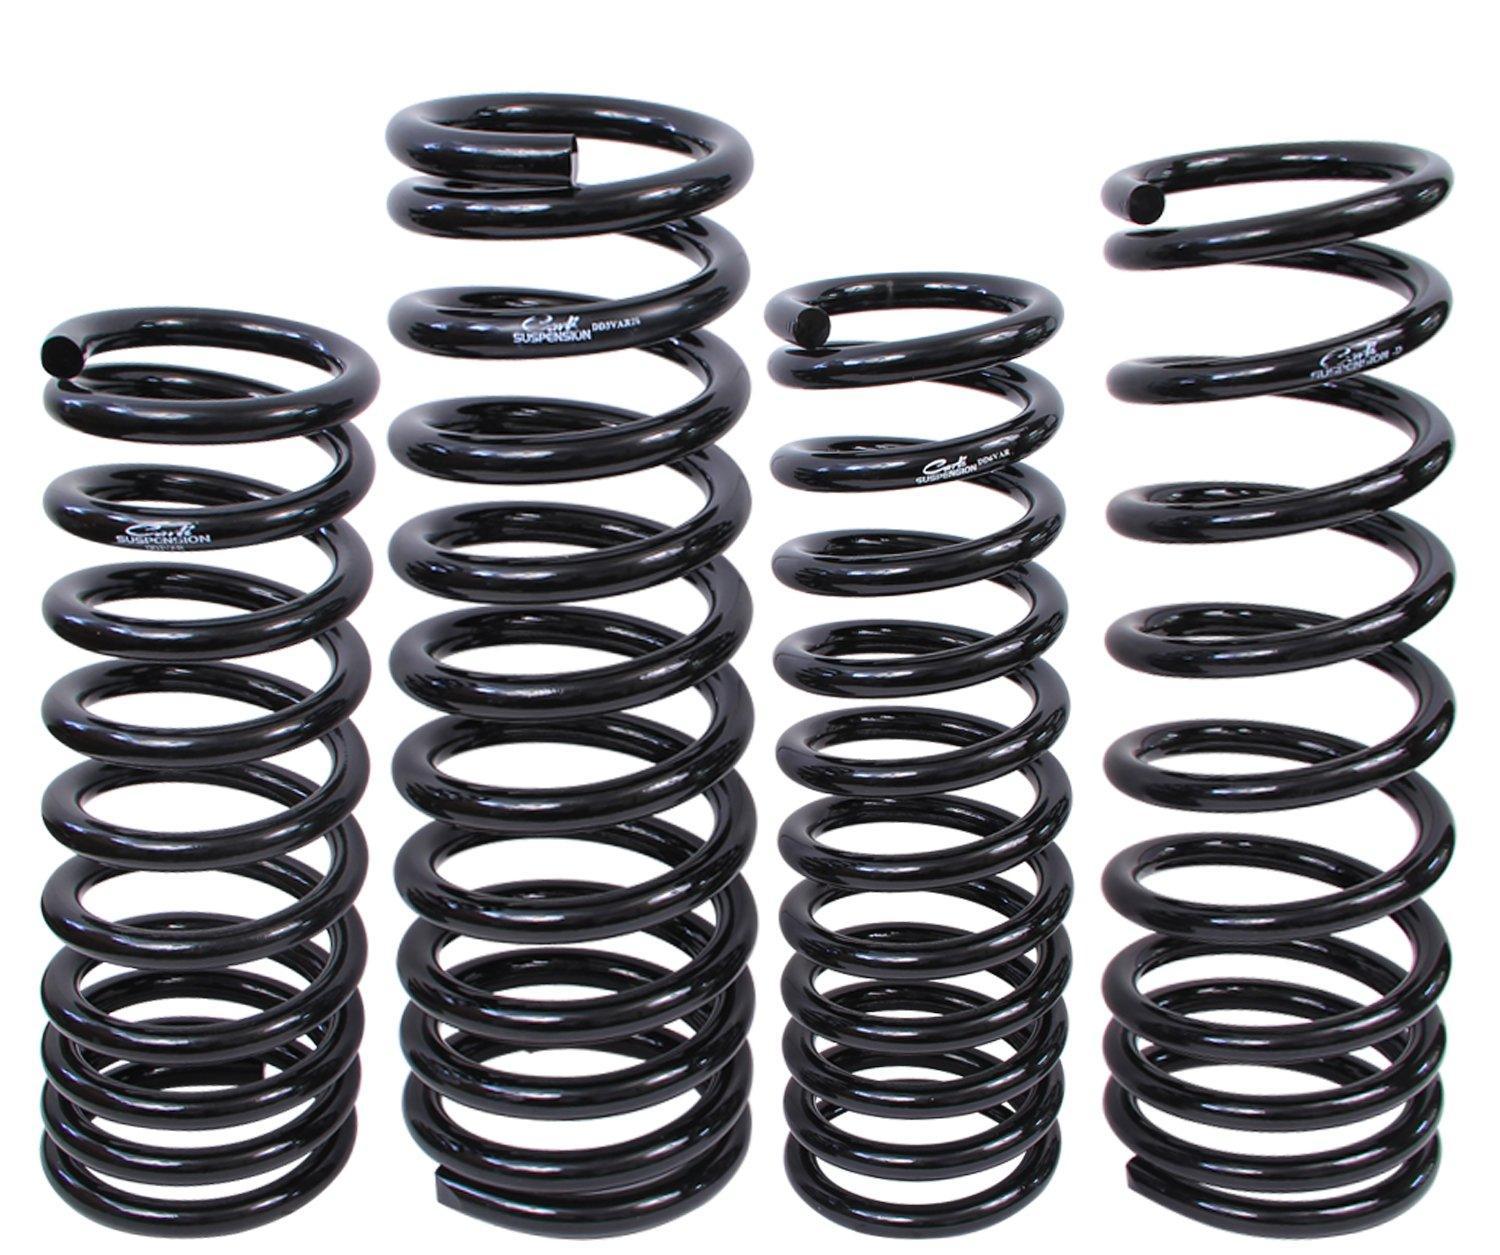 '03-13 Dodge Ram 2500/3500 Multi-Rate and Linear Coil Springs Suspension Carli Suspension  display